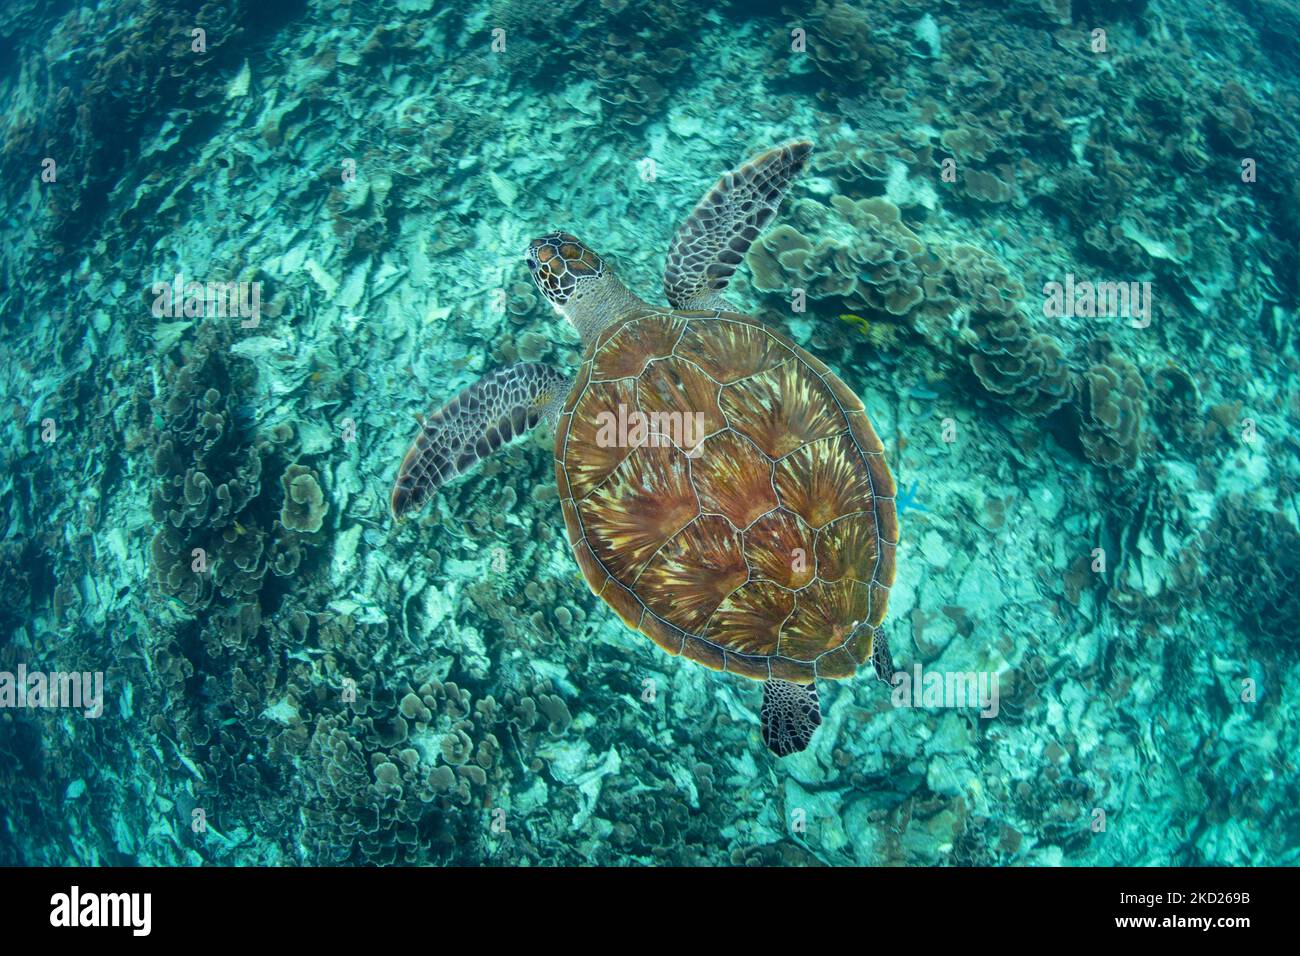 A Green sea turtle, Chelonia mydas, swims over a coral reef in Komodo National Park, Indonesia. This beautiful reptile is an endangered species. Stock Photo